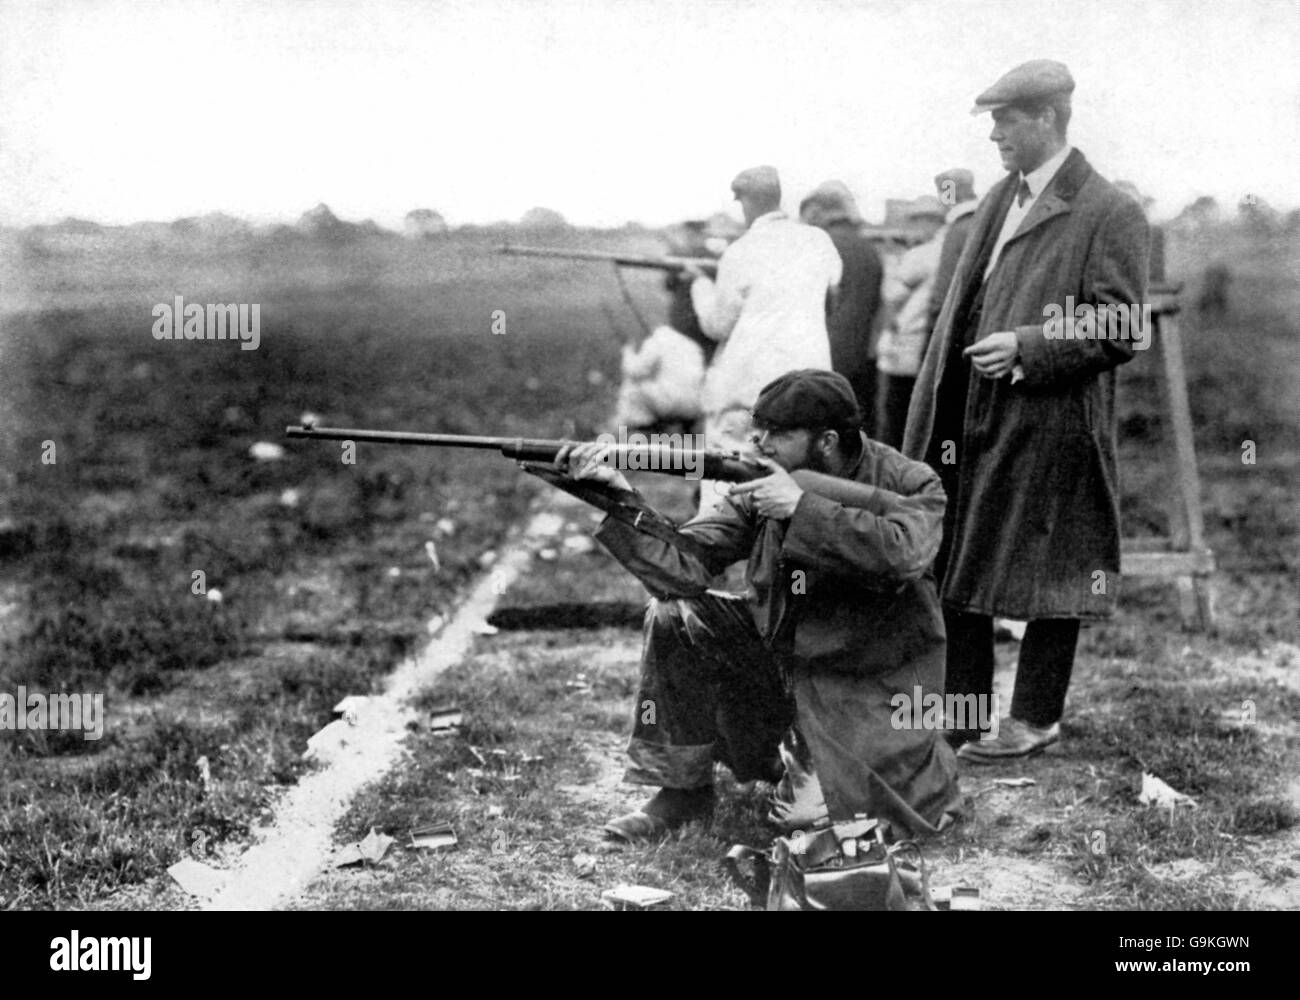 Shooting - London Olympic Games 1908 - Free Rifle - Bisley. Great Britain's Maurice Blood, who won bronze in the free rifle discipline, takes aim Stock Photo